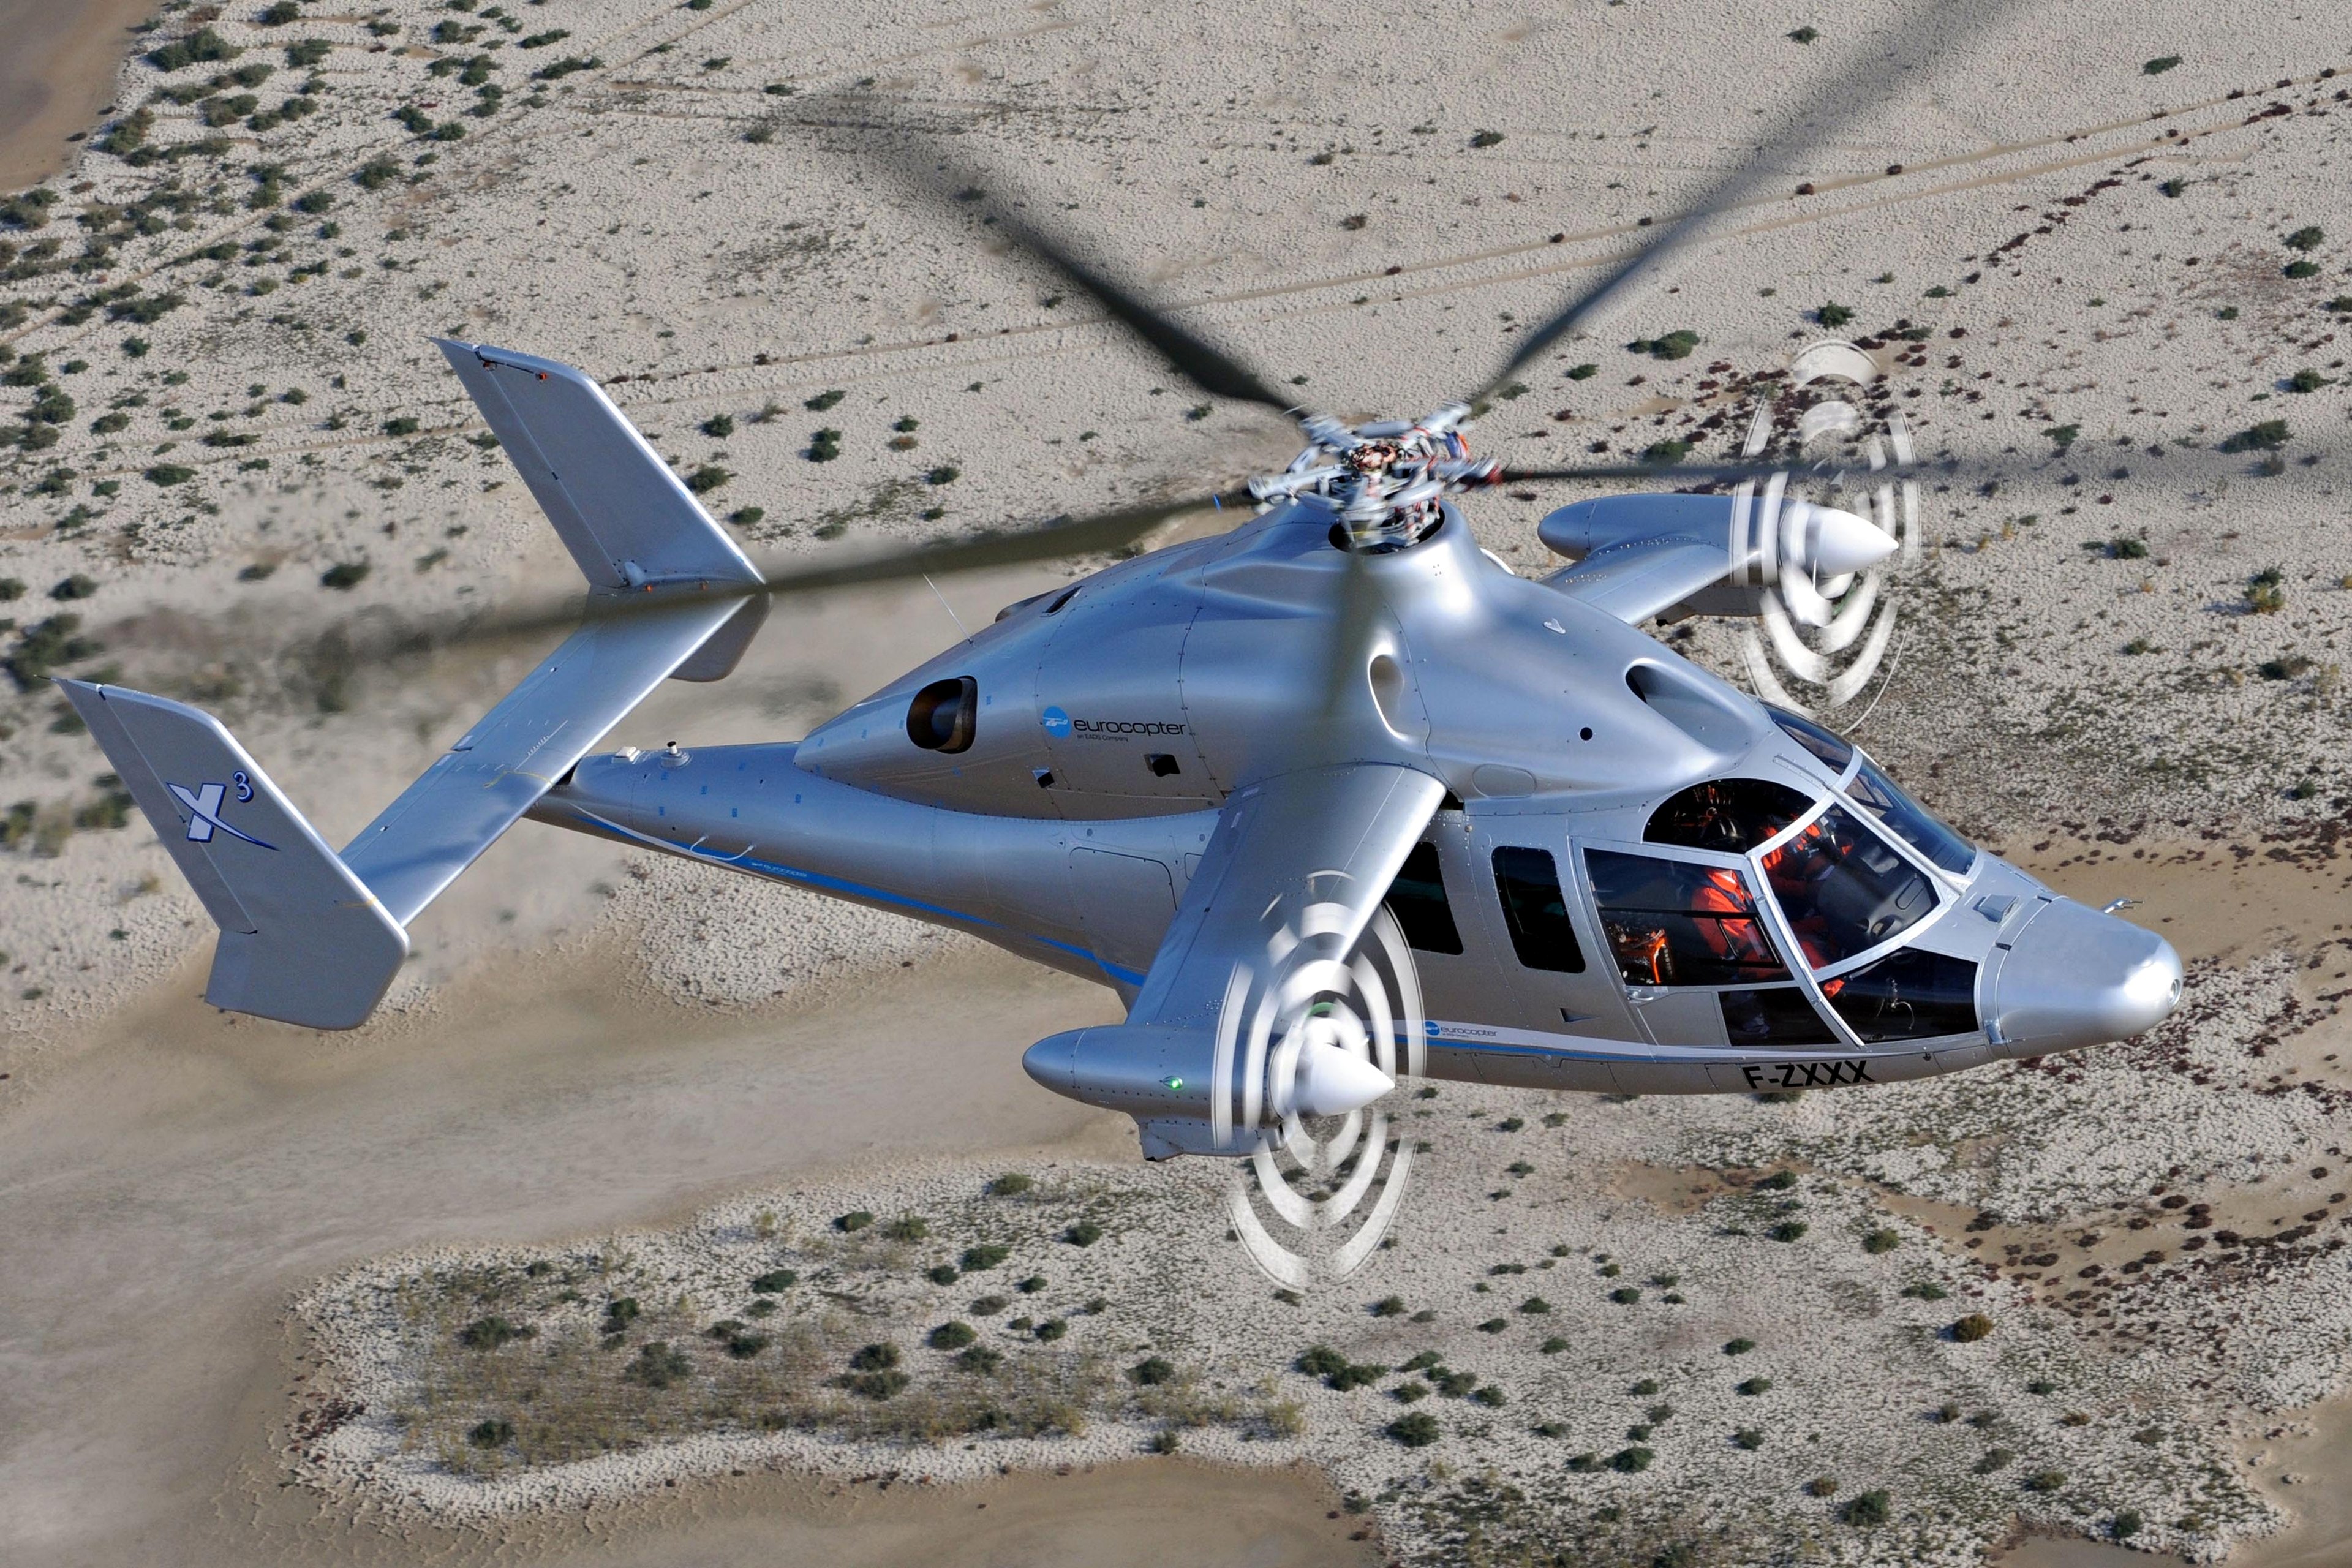 eurocopter, X3, Experimental, Hybrid, Helicopter, Flight, Aircrafts, Gray, Desert, Earth, Landscapes, Nature Wallpaper